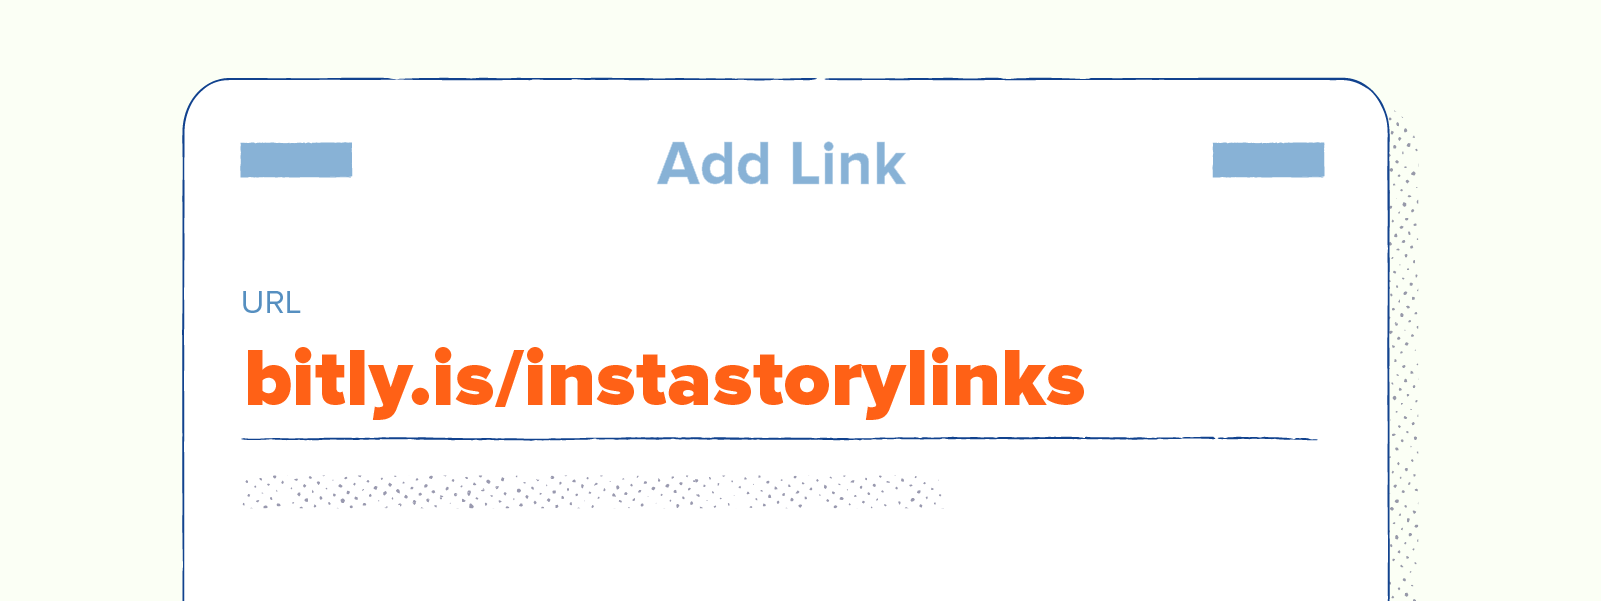 Illustration of a shortened link pasted in a URL field of an Add Link section of Instagram